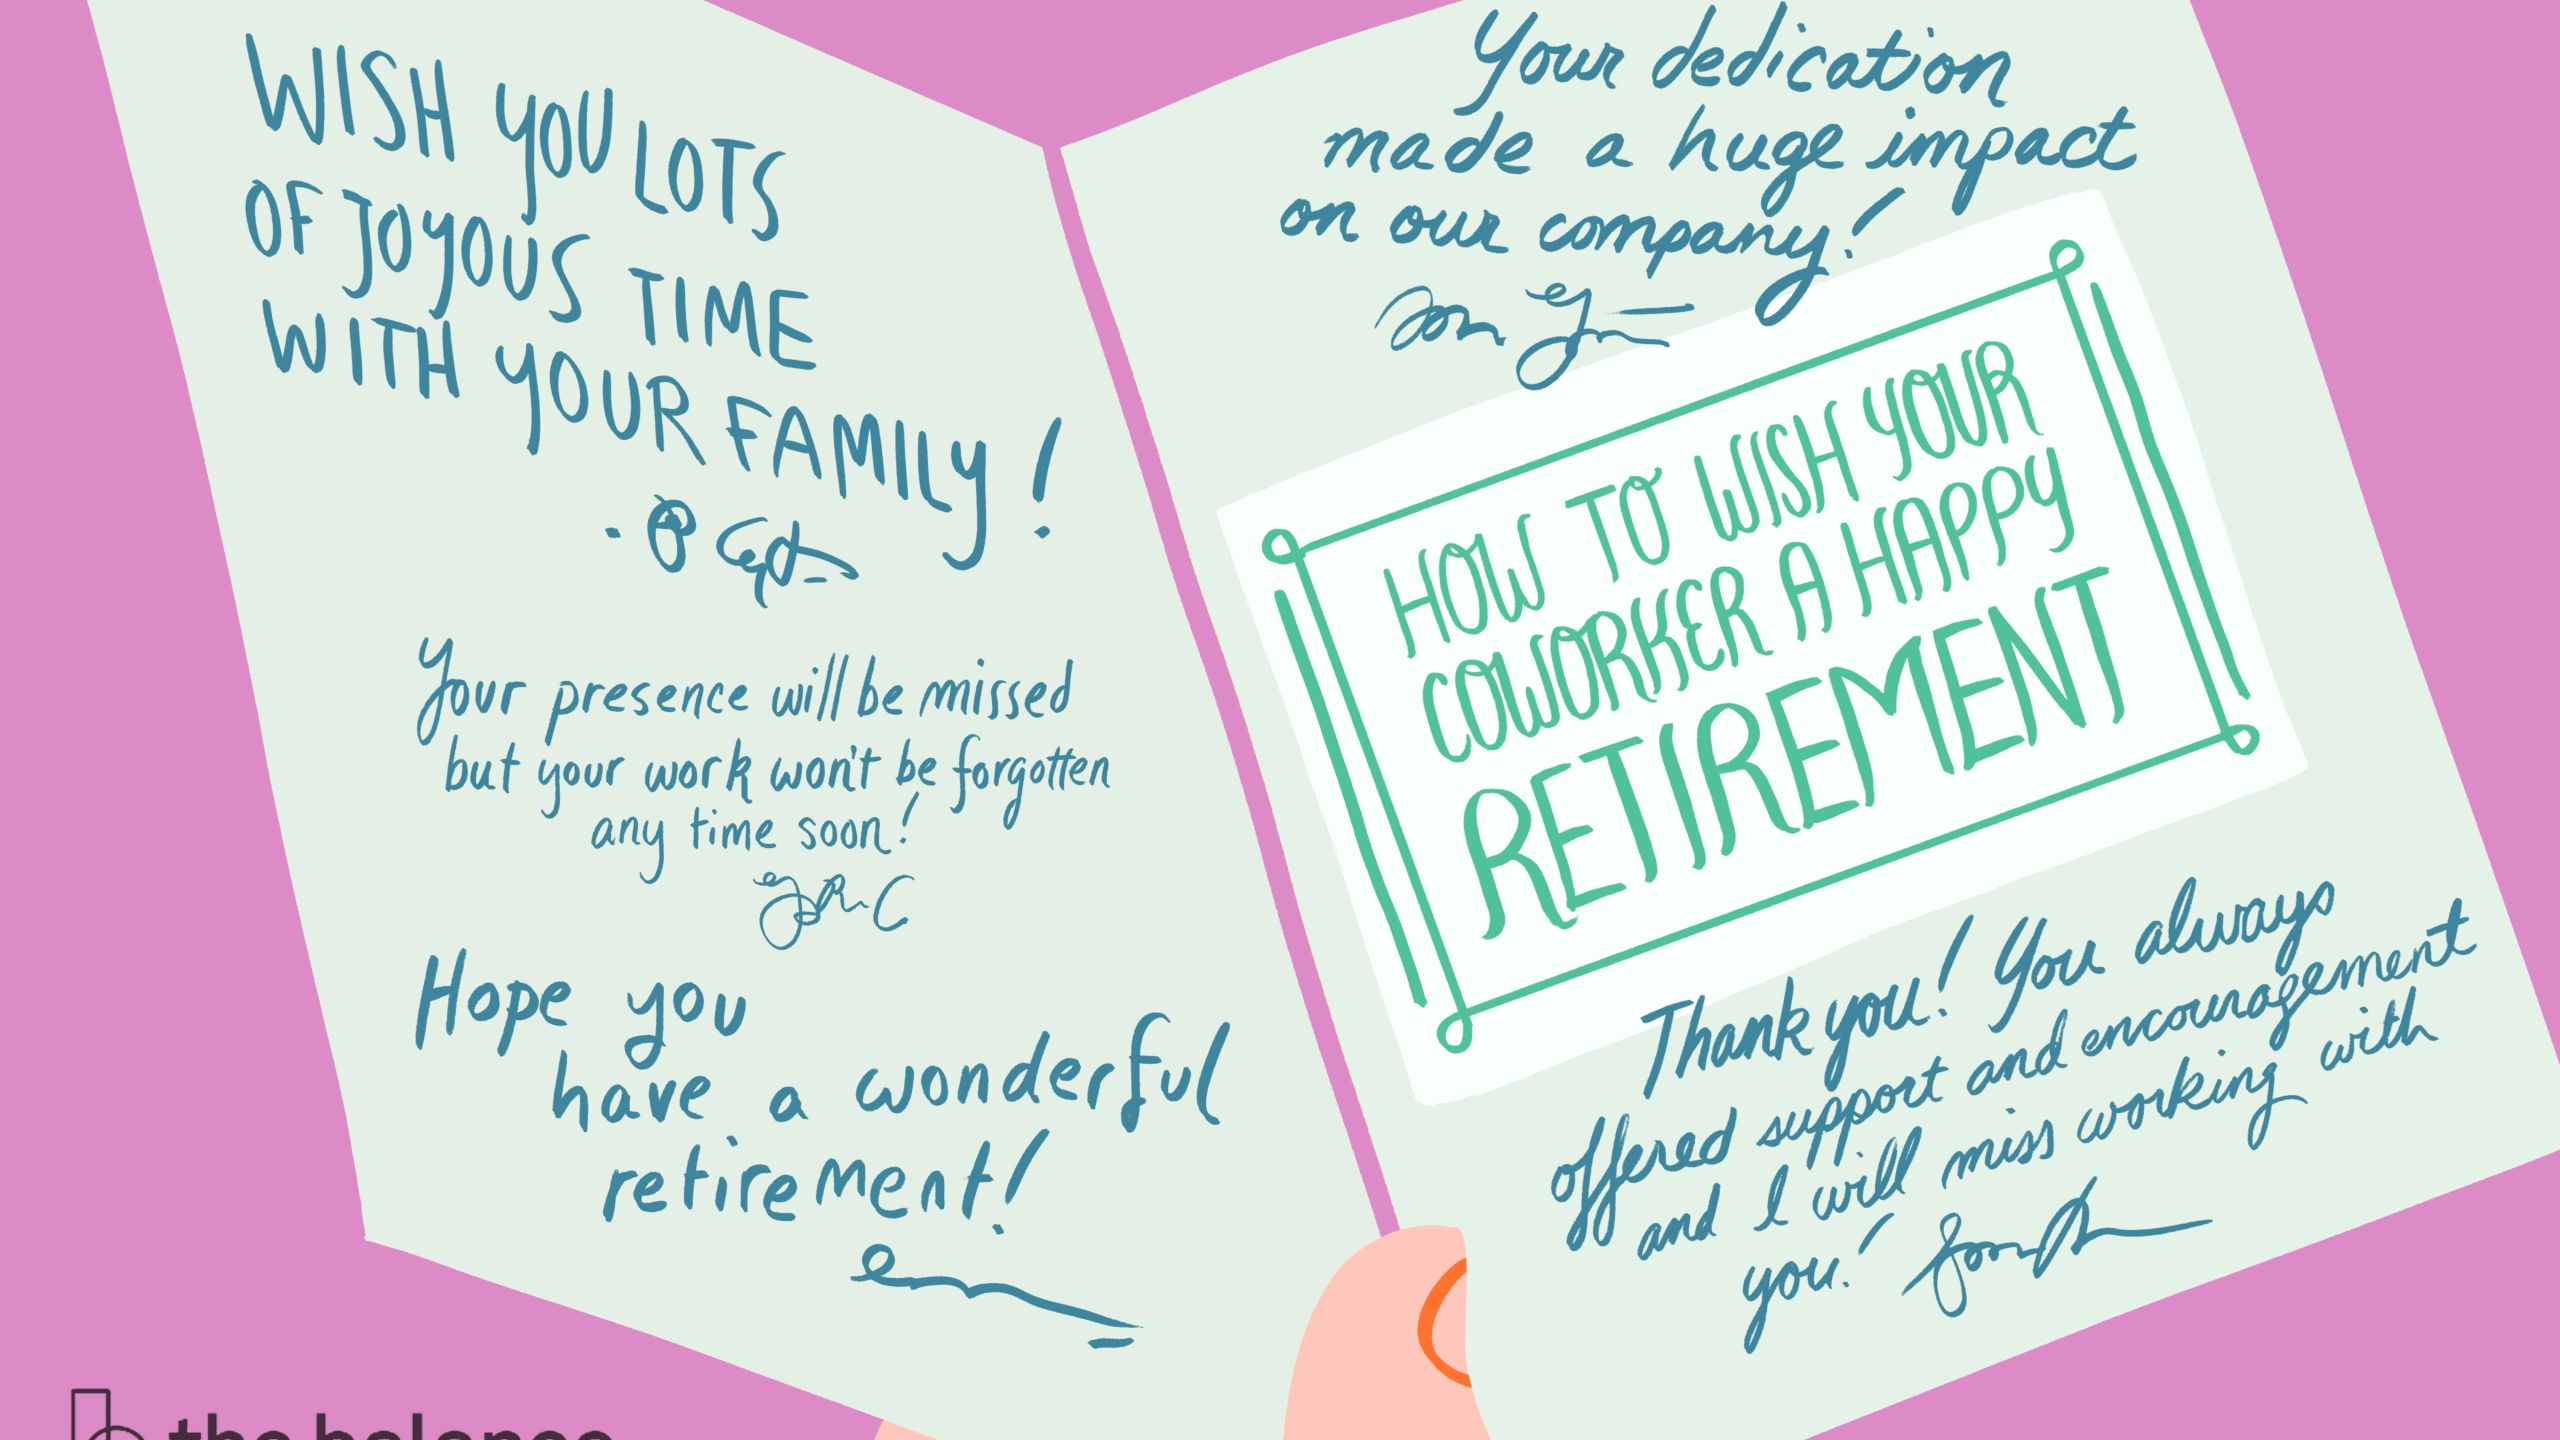 How To Best Wish Your Coworker A Happy Retirement With Retirement Card Template